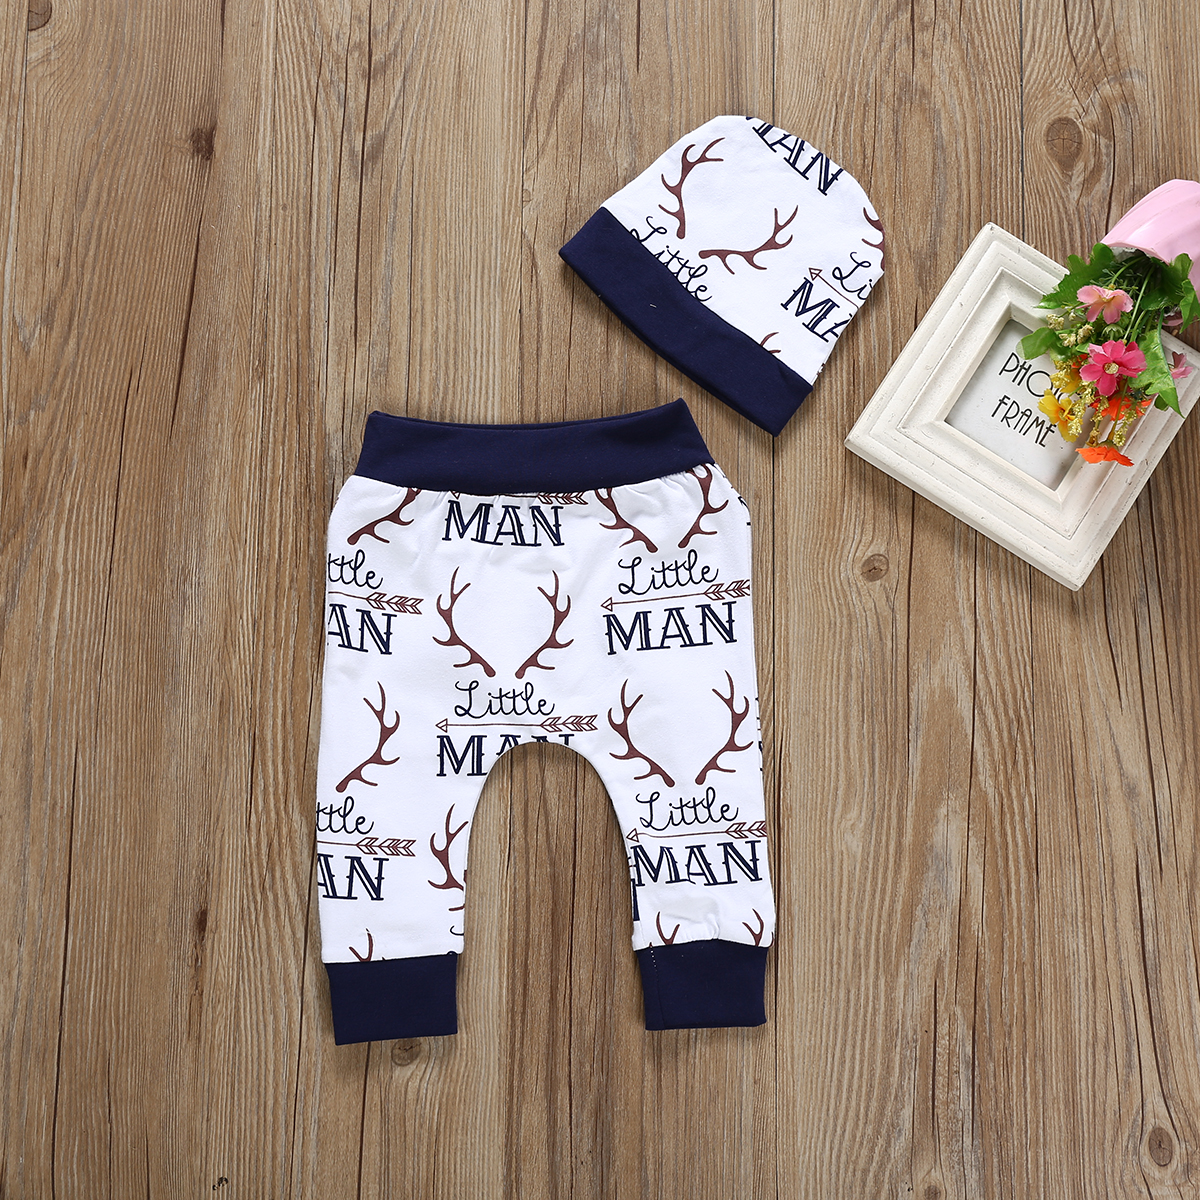 2019 Brand New Mommy's Other Man Newborn Baby Boy 3PCS Outfits Clothing Short Sleeve Cotton Bodysuit Tops Deers Pant Trouser Hat